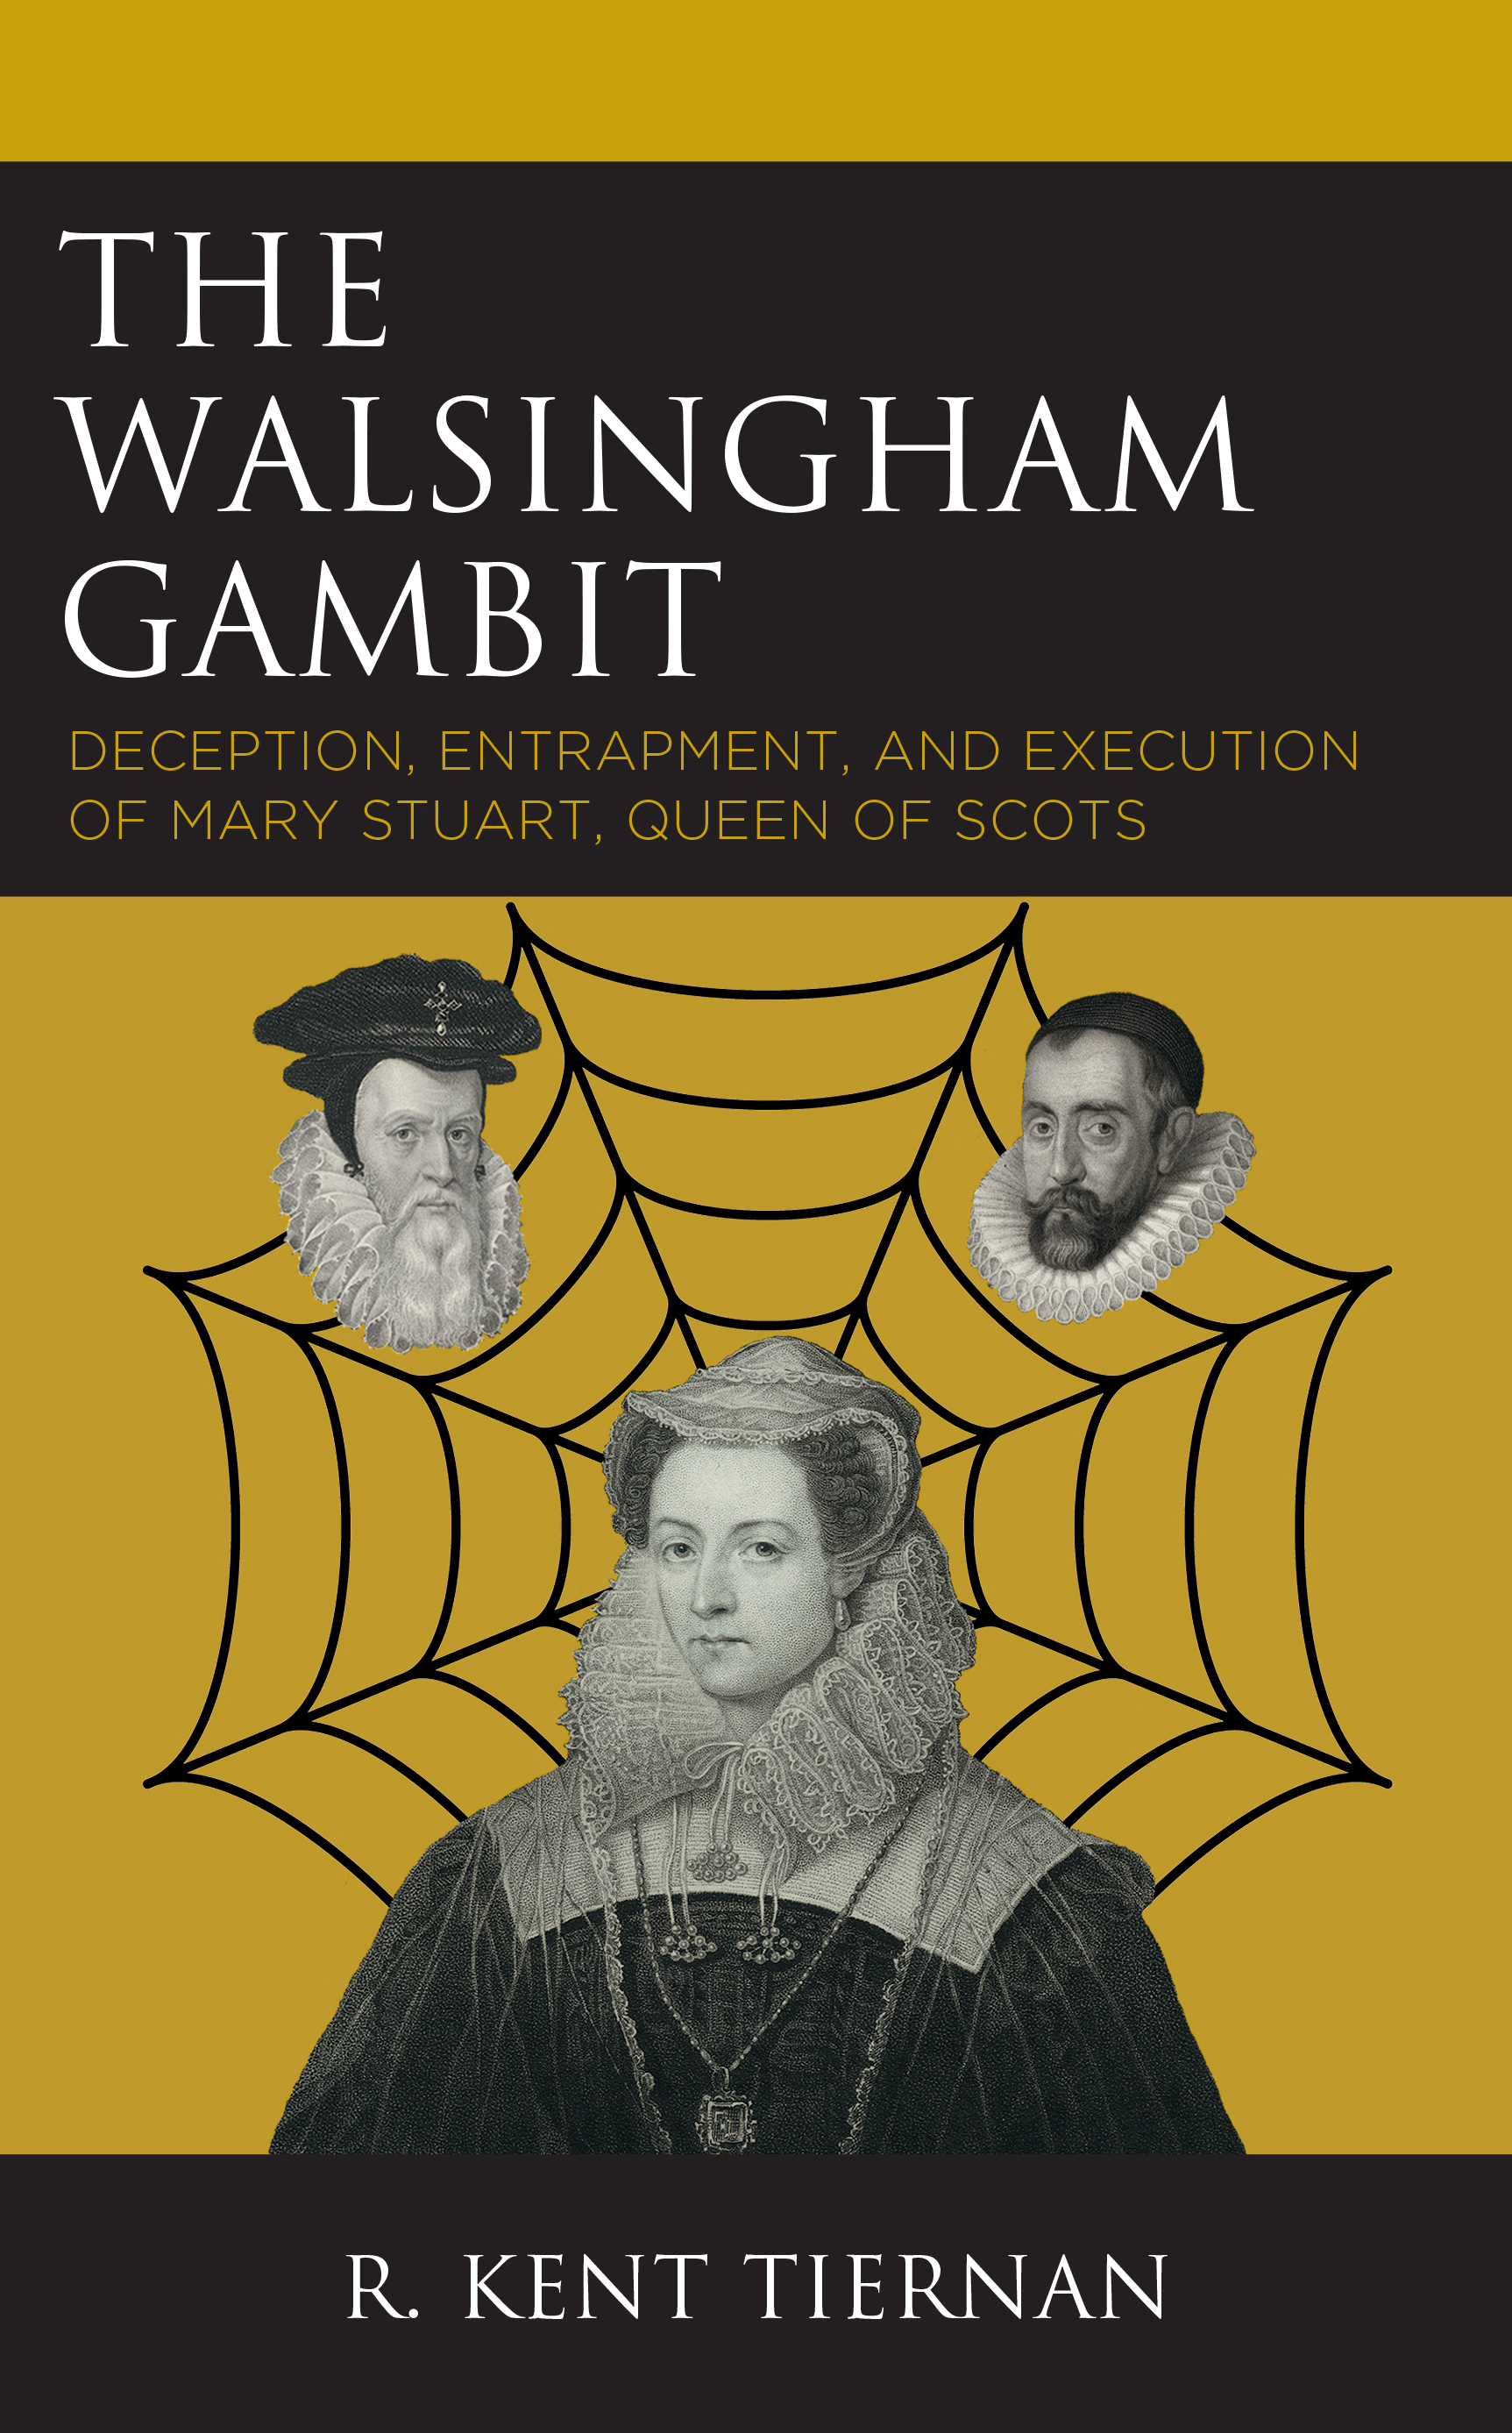 The Walsingham Gambit: Deception, Entrapment, and Execution of Mary Stuart, Queen of Scots